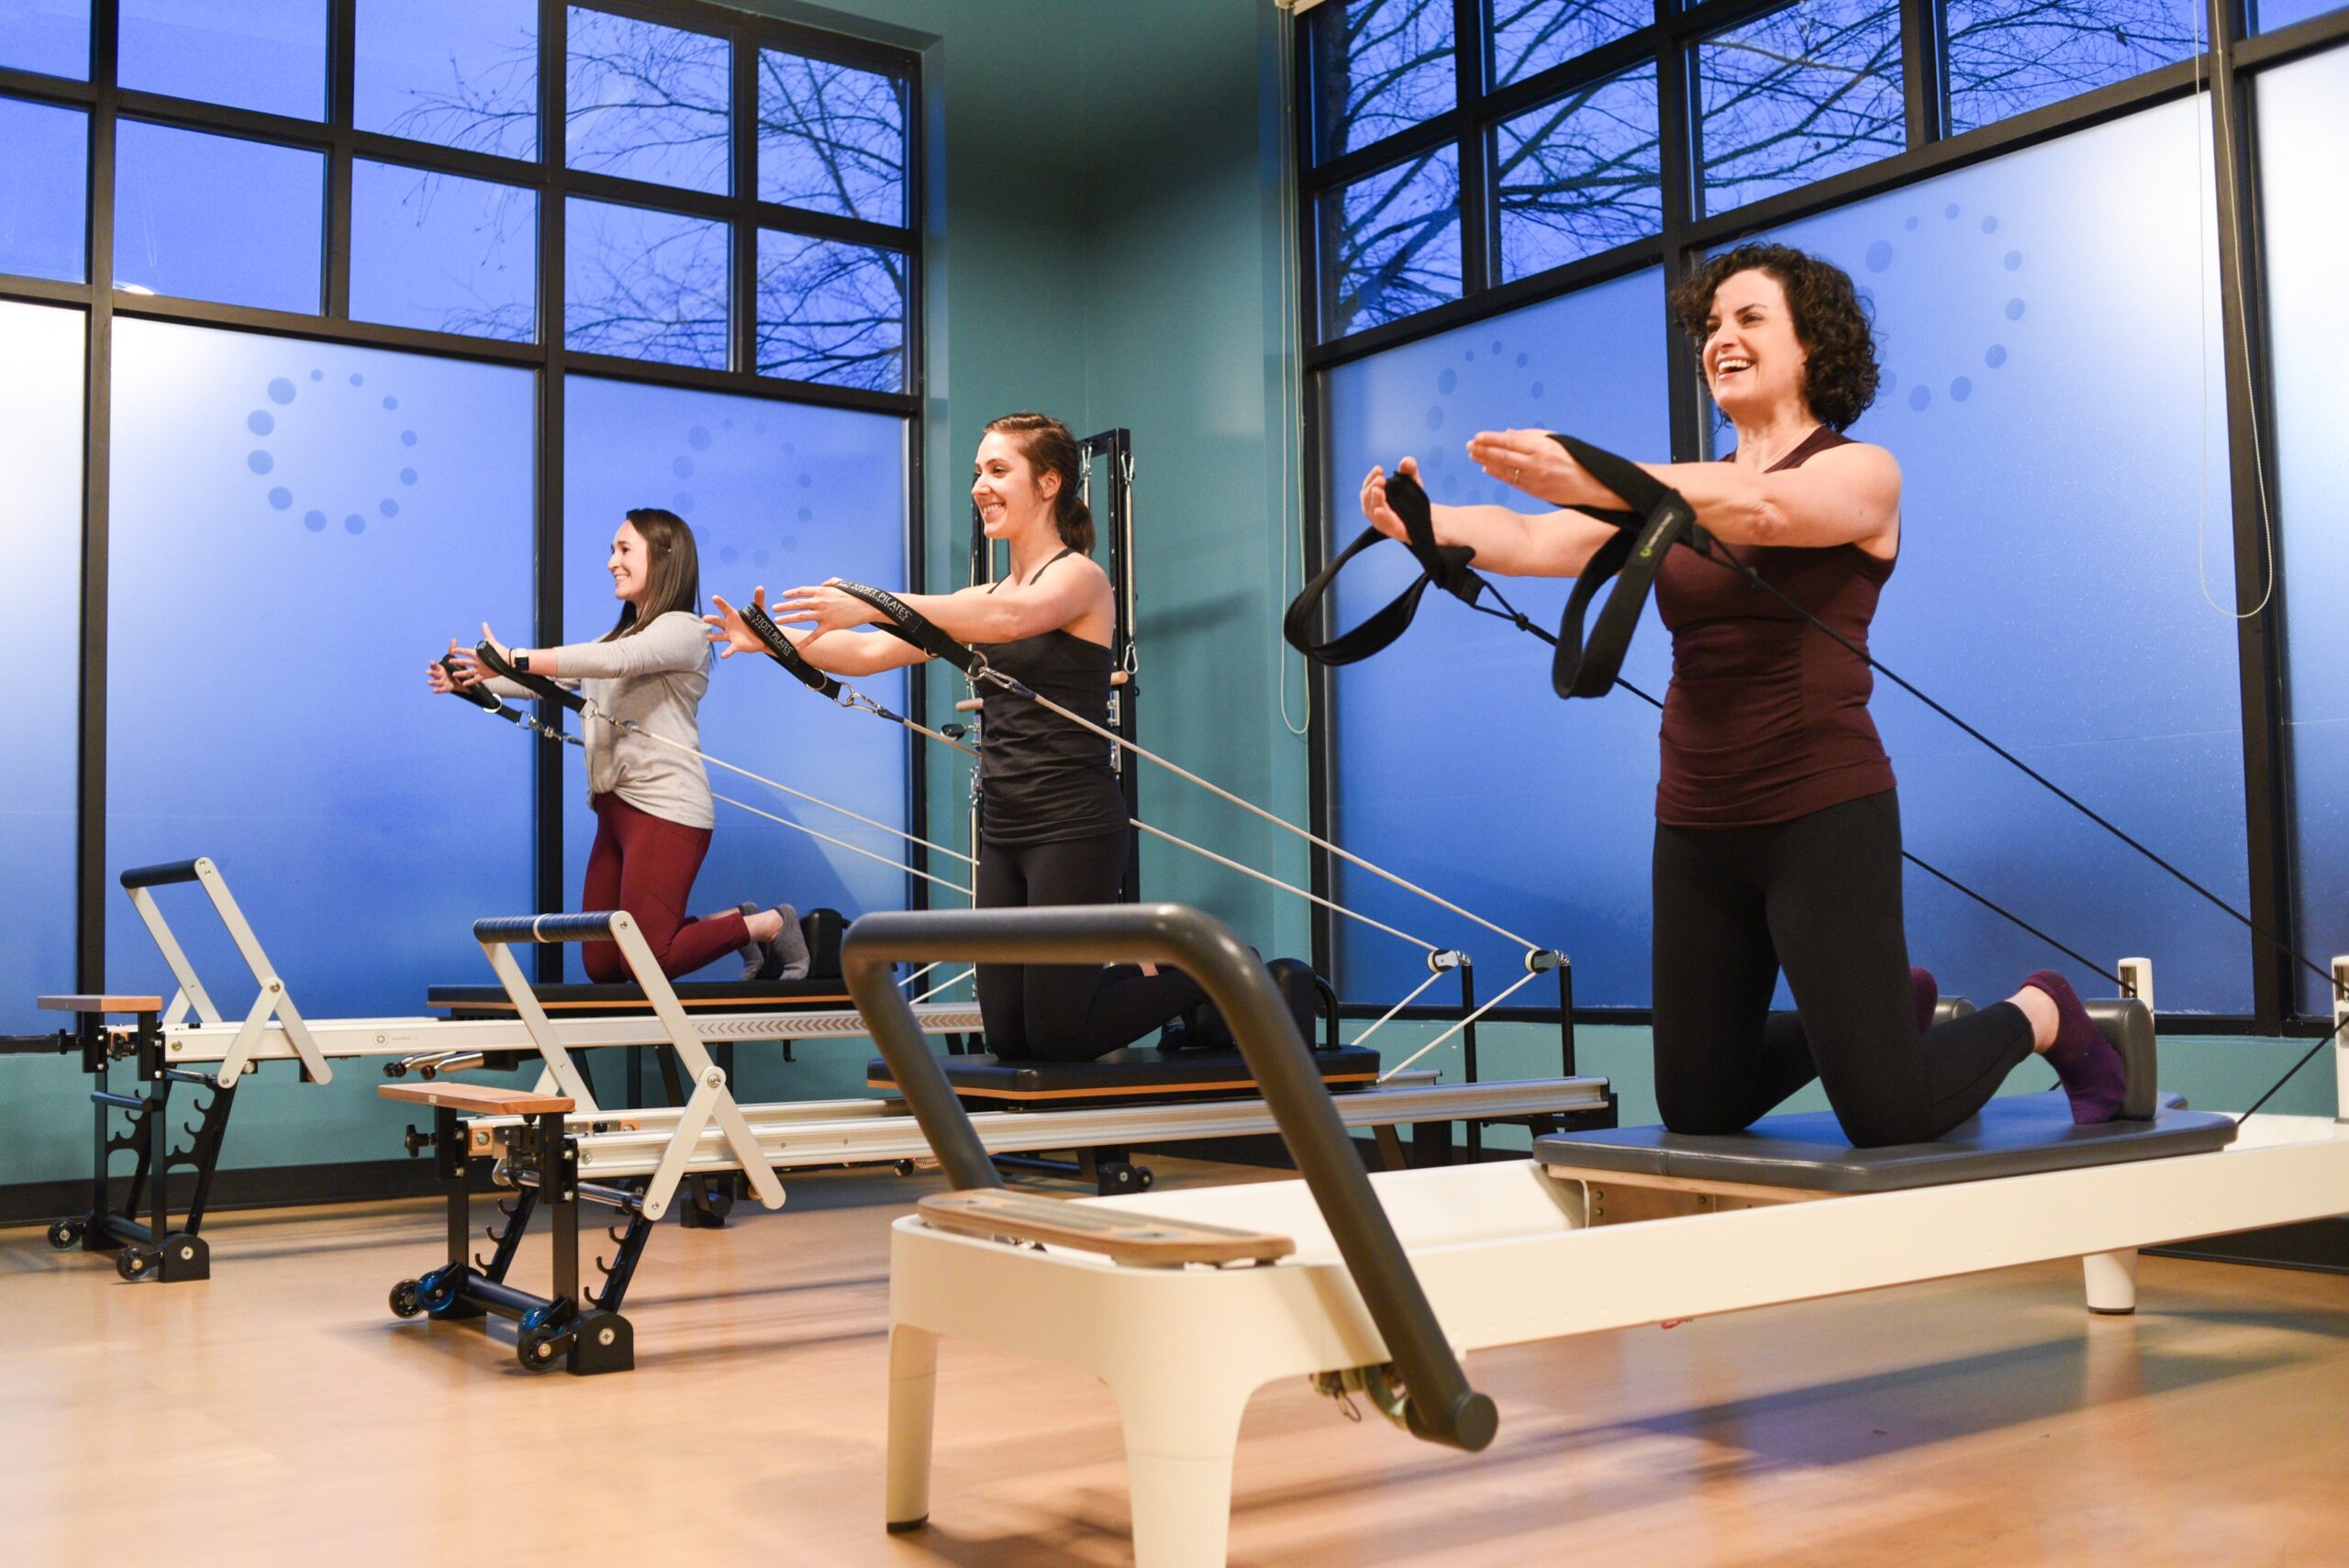 Intermediate Pilates Reformer Workout - The Hard To Do (and Teach) Exercises  